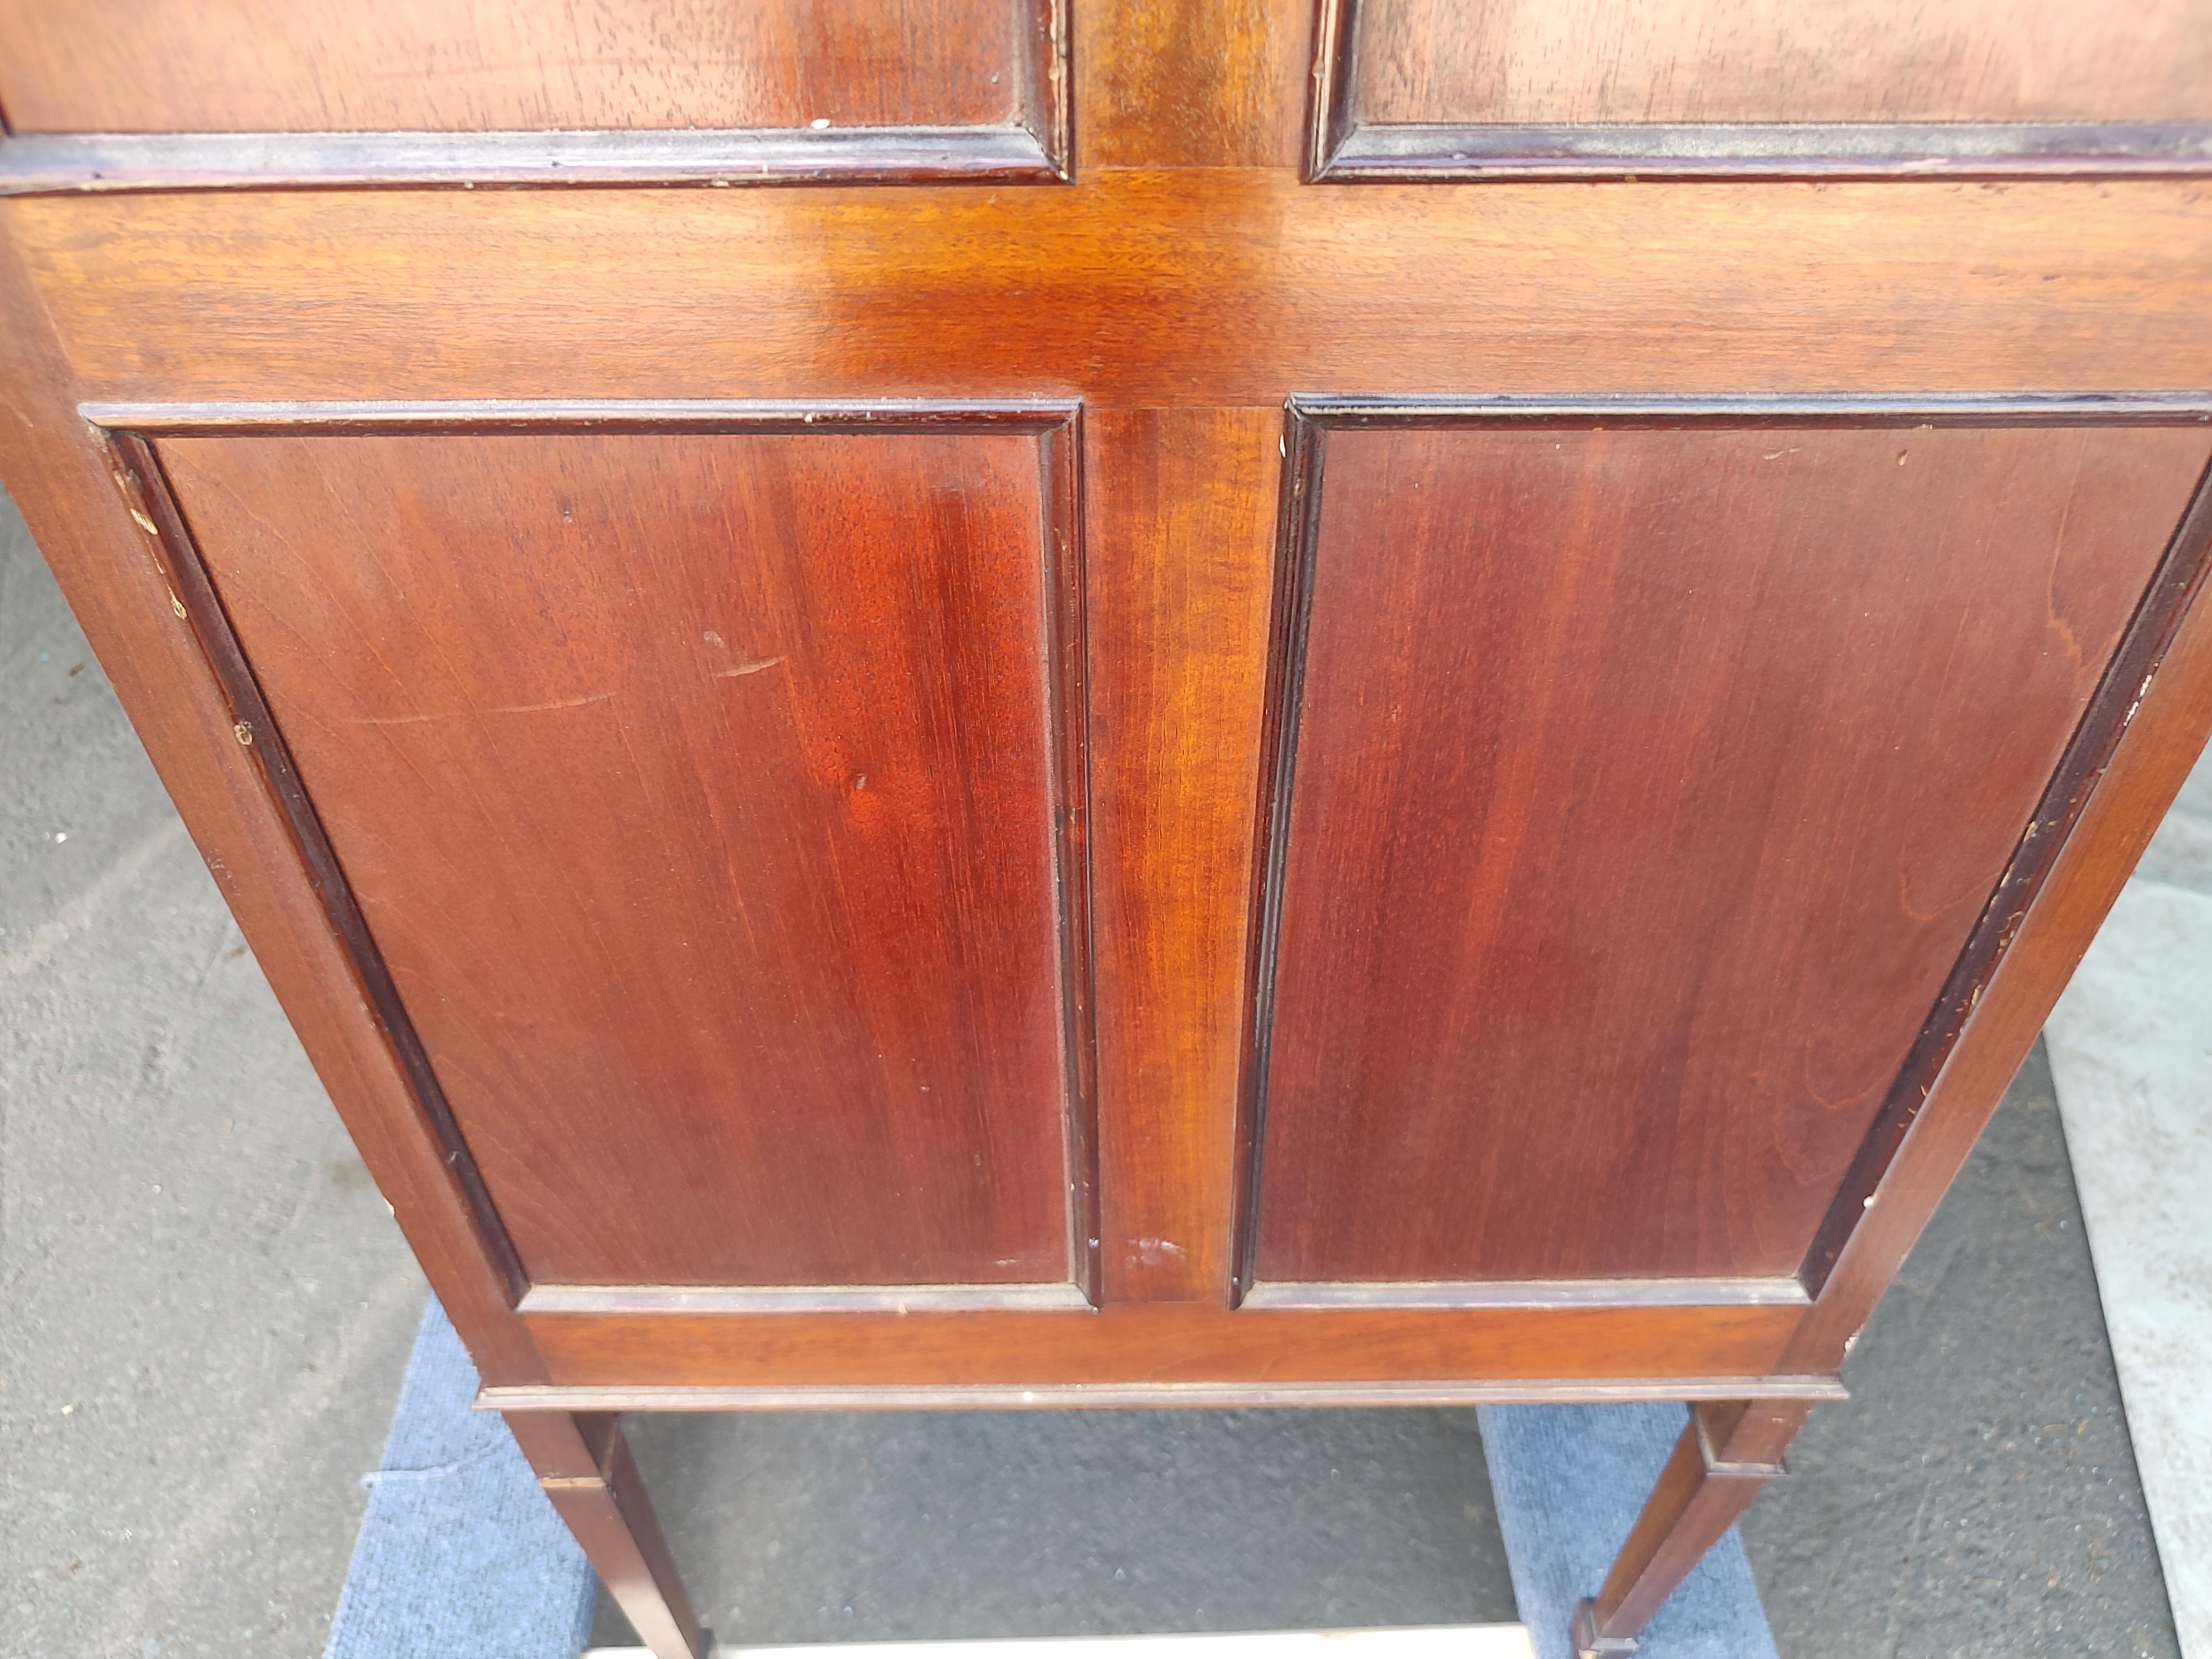 A very elegant mahogany sheet music cabinet with banding & inlay. Drop down drawer fronts which reveal oak pull out sliding drawers. Perfect candidate for reuse, great size for a bathroom or entryway. In excellent antique condition with minimal